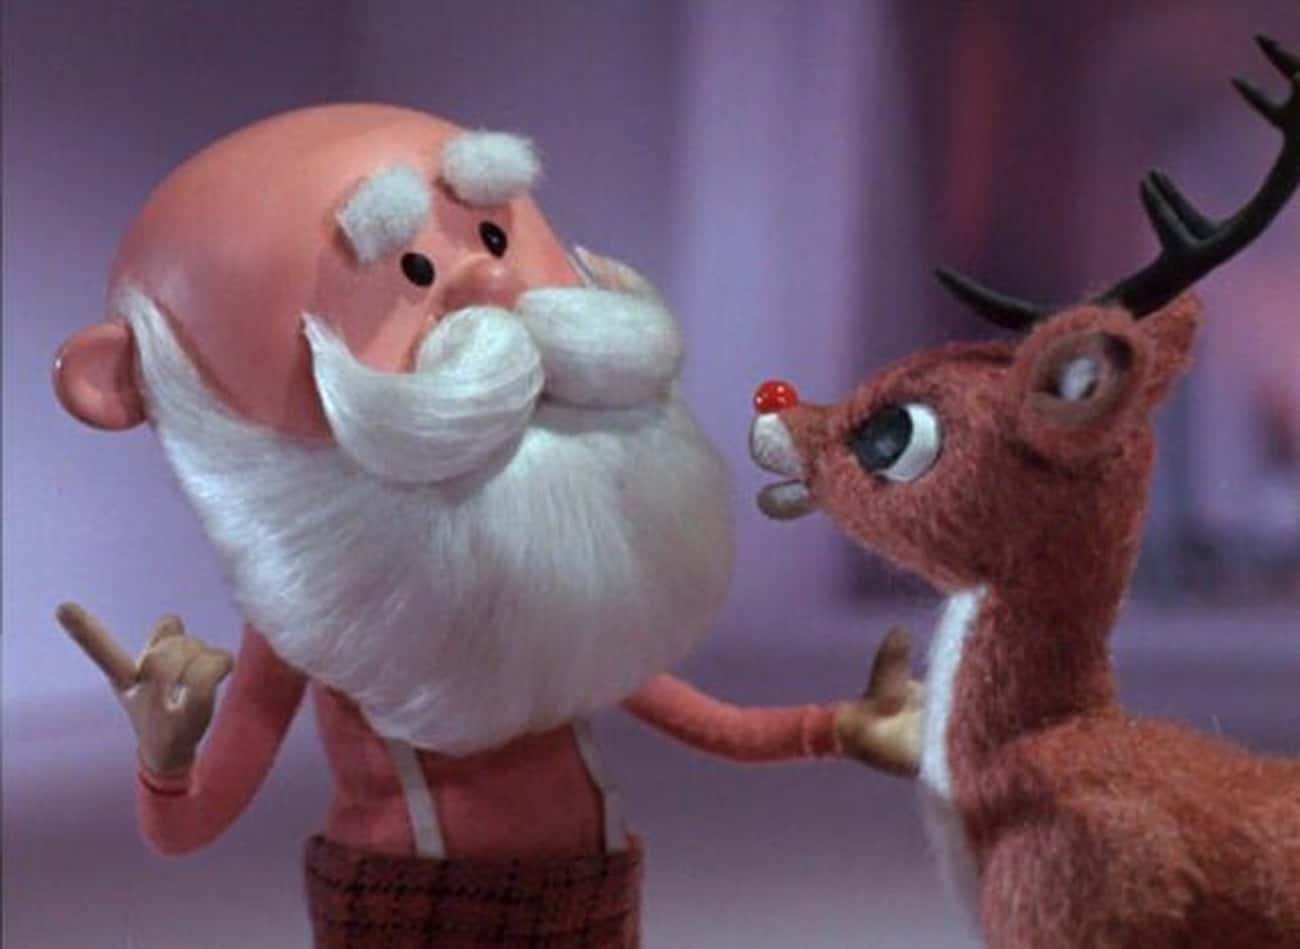 Aries (March 21 - April 19): Santa Claus In 'Rudolph the Red-Nosed Reindeer'